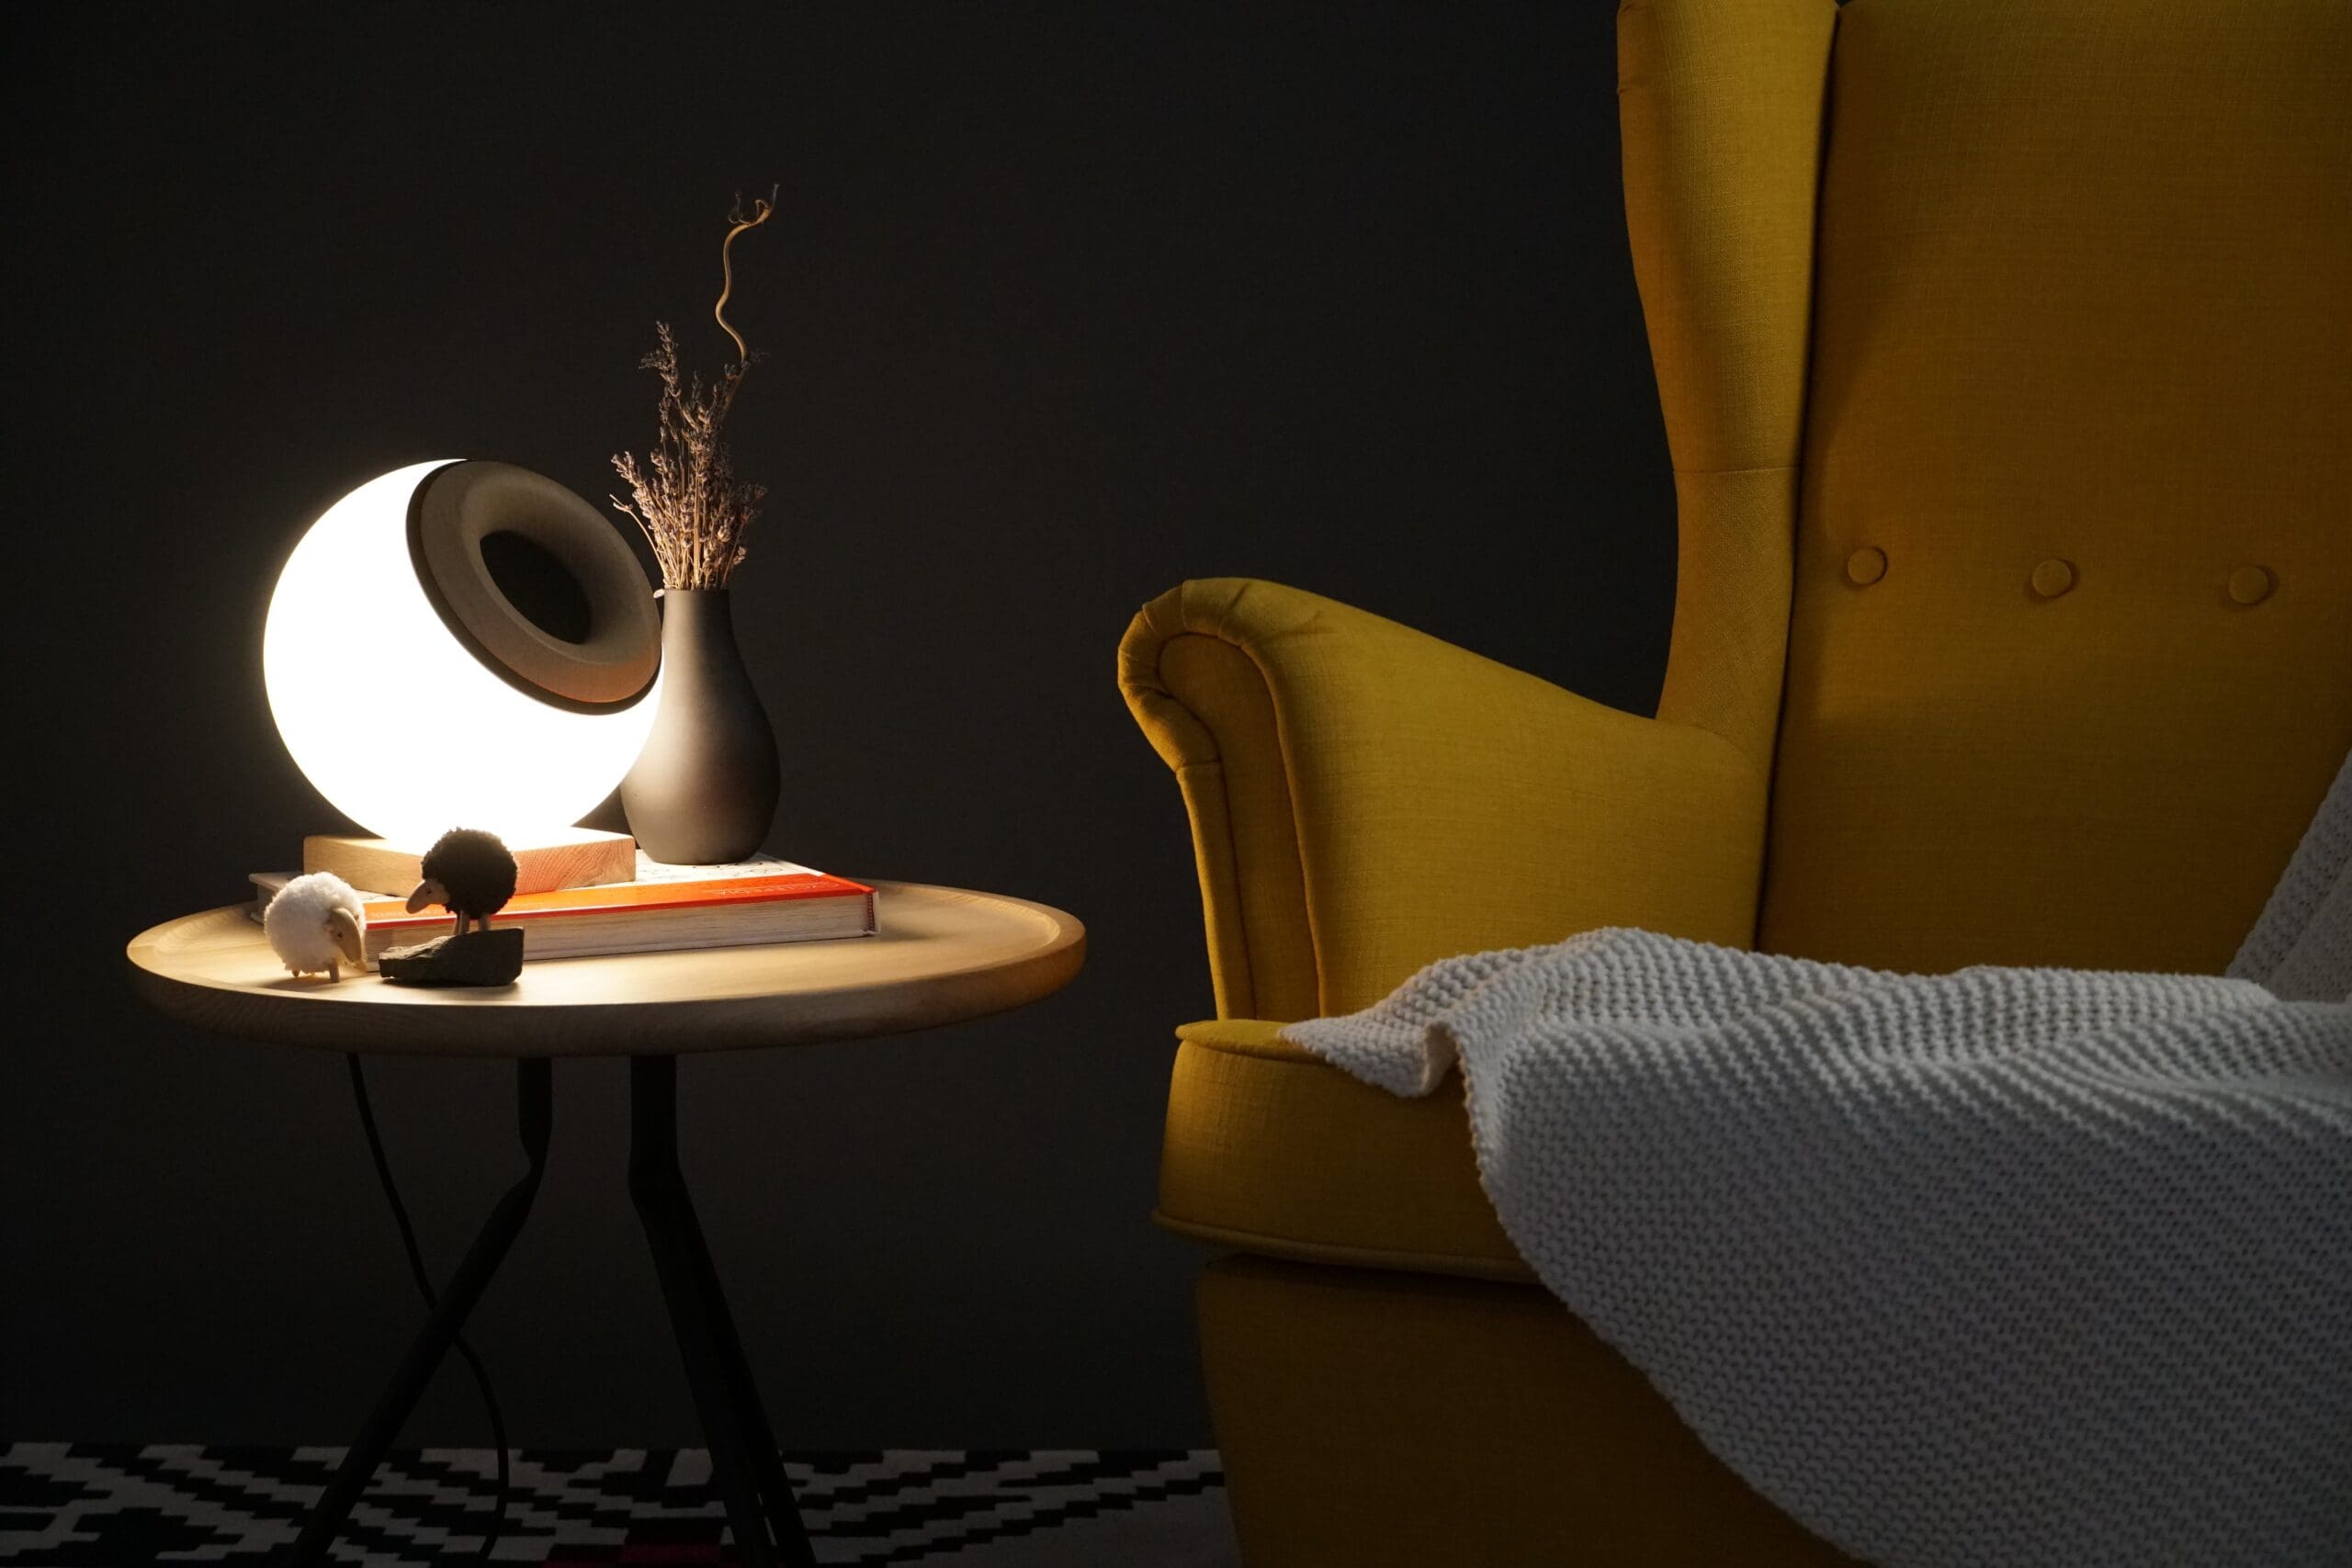 dynamic ambience 1 - HYBRID DESIGN PRODUCT OUPIO COMBINES HI-FI SPEAKERS WITH HUMAN-CENTRIC LIGHTING